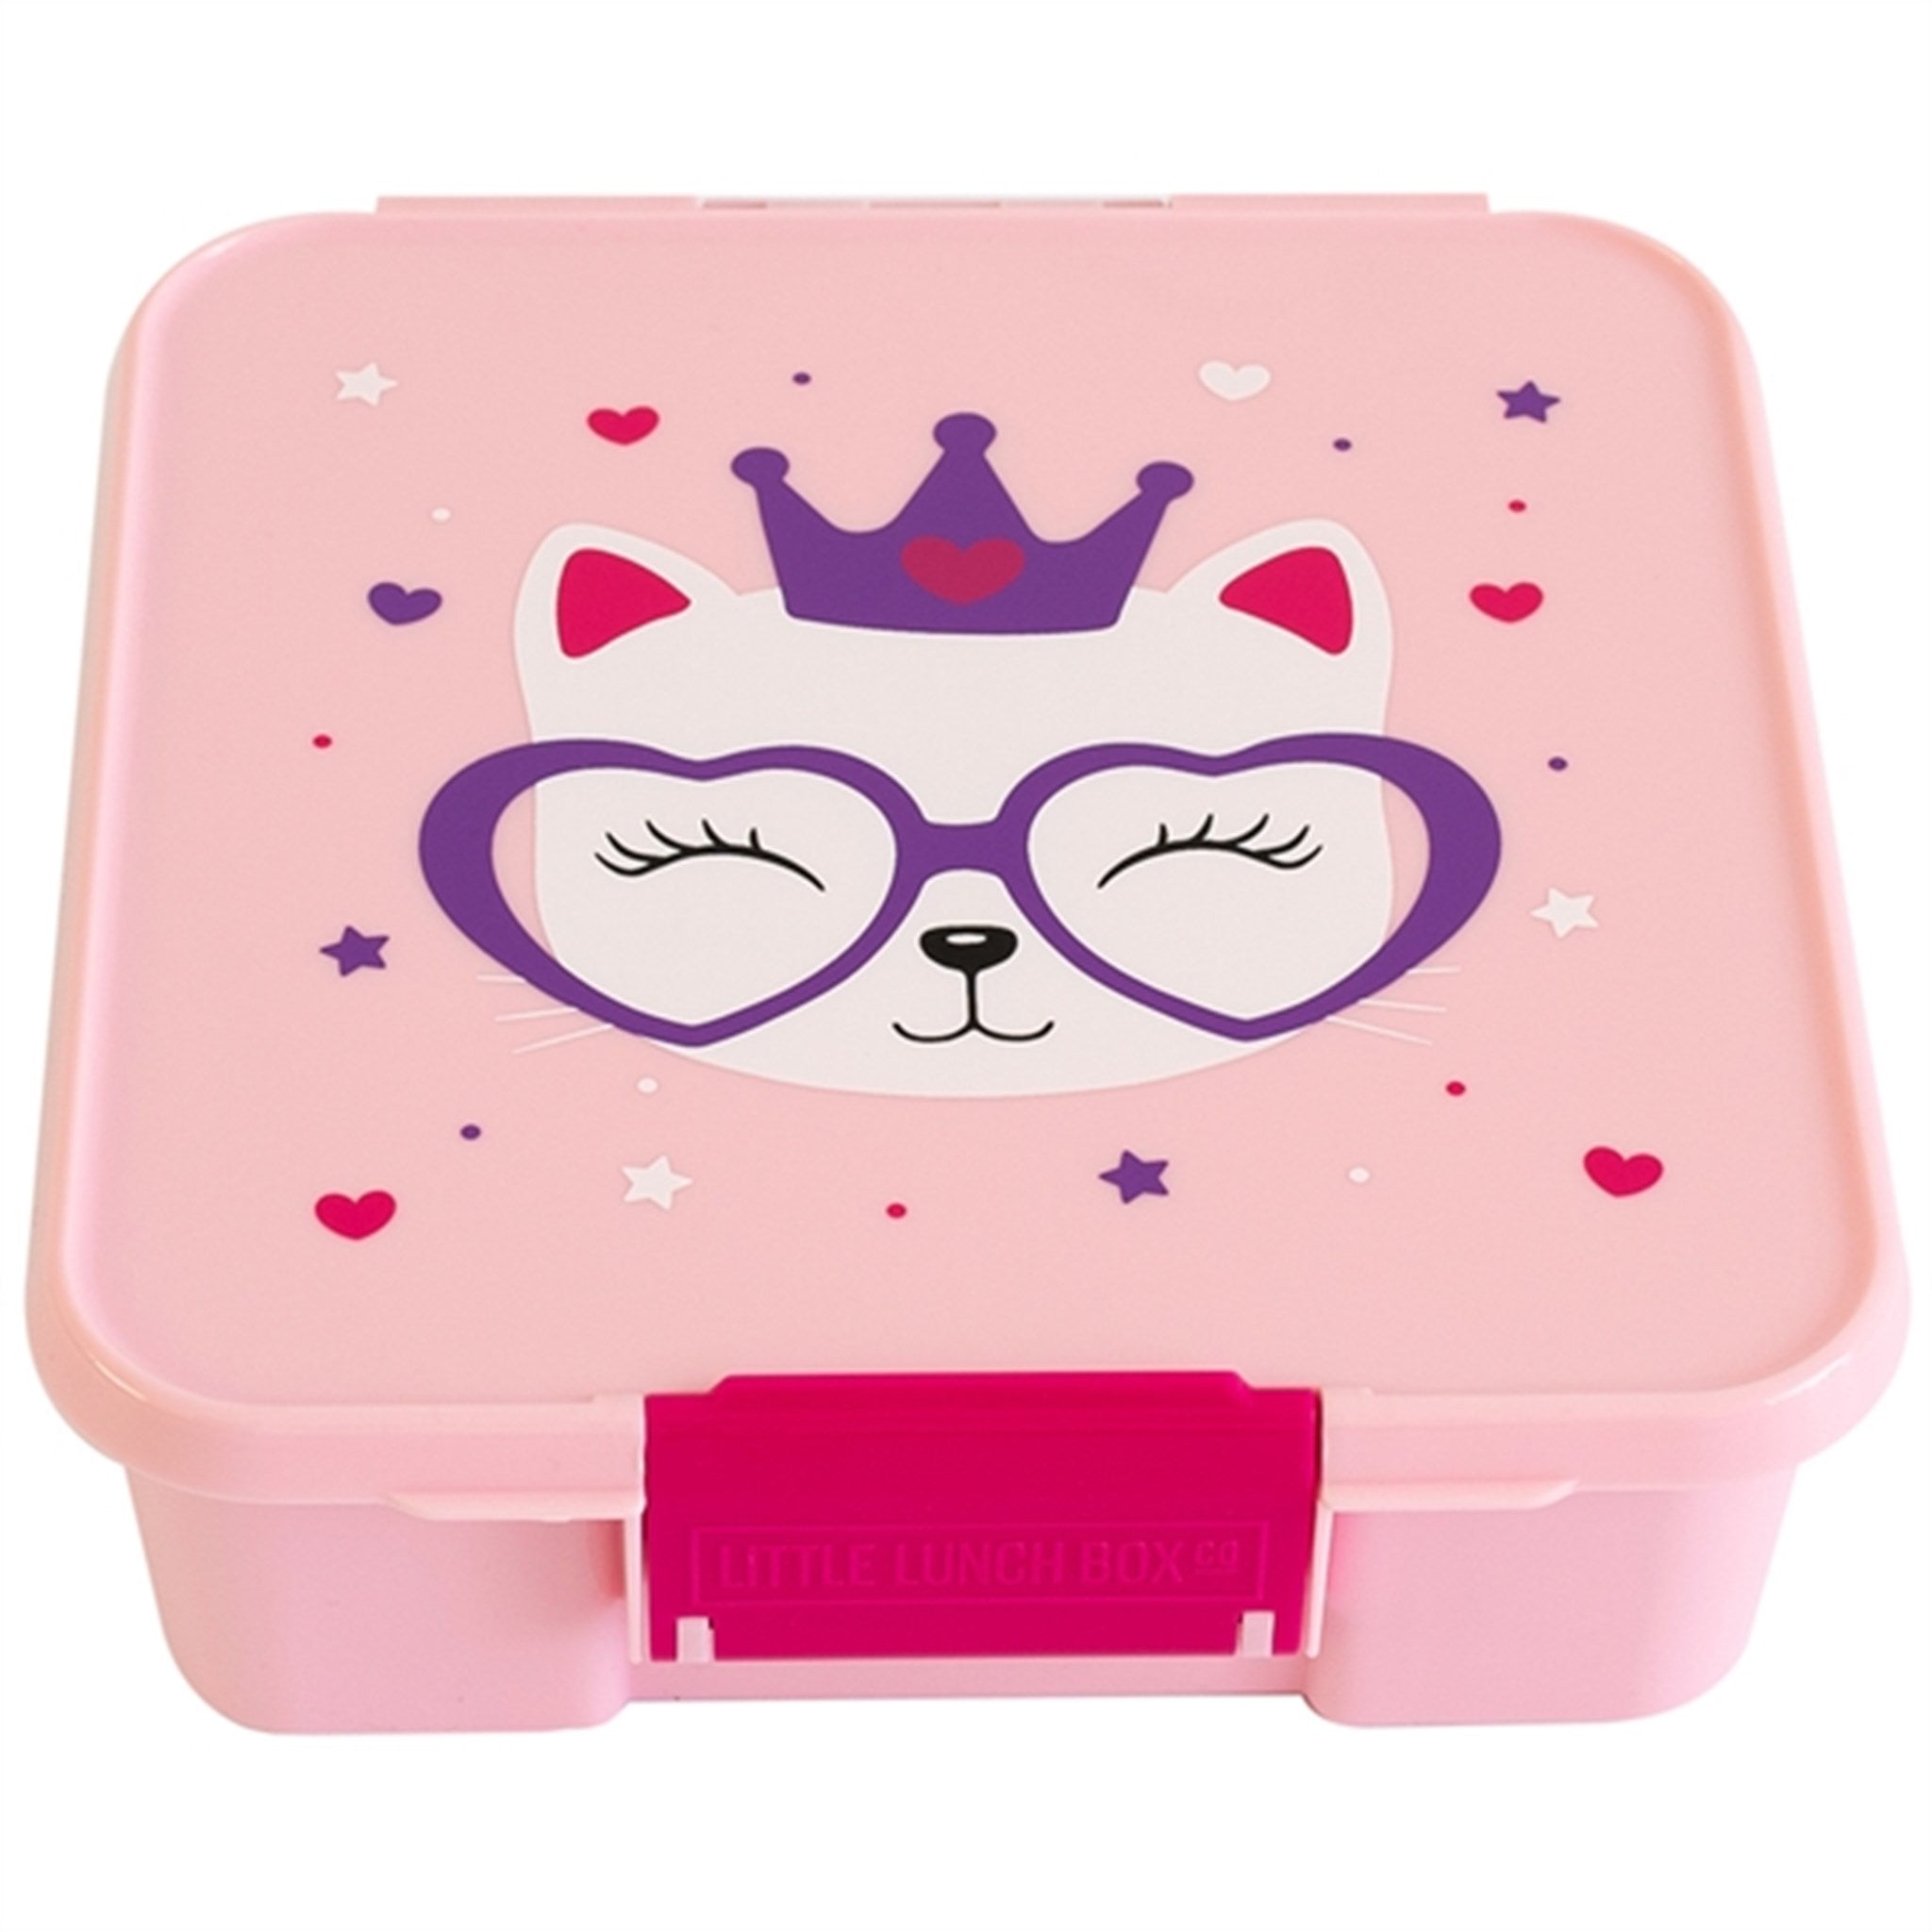 Little Lunch Box Co Bento 5 Lunch Box Kitty